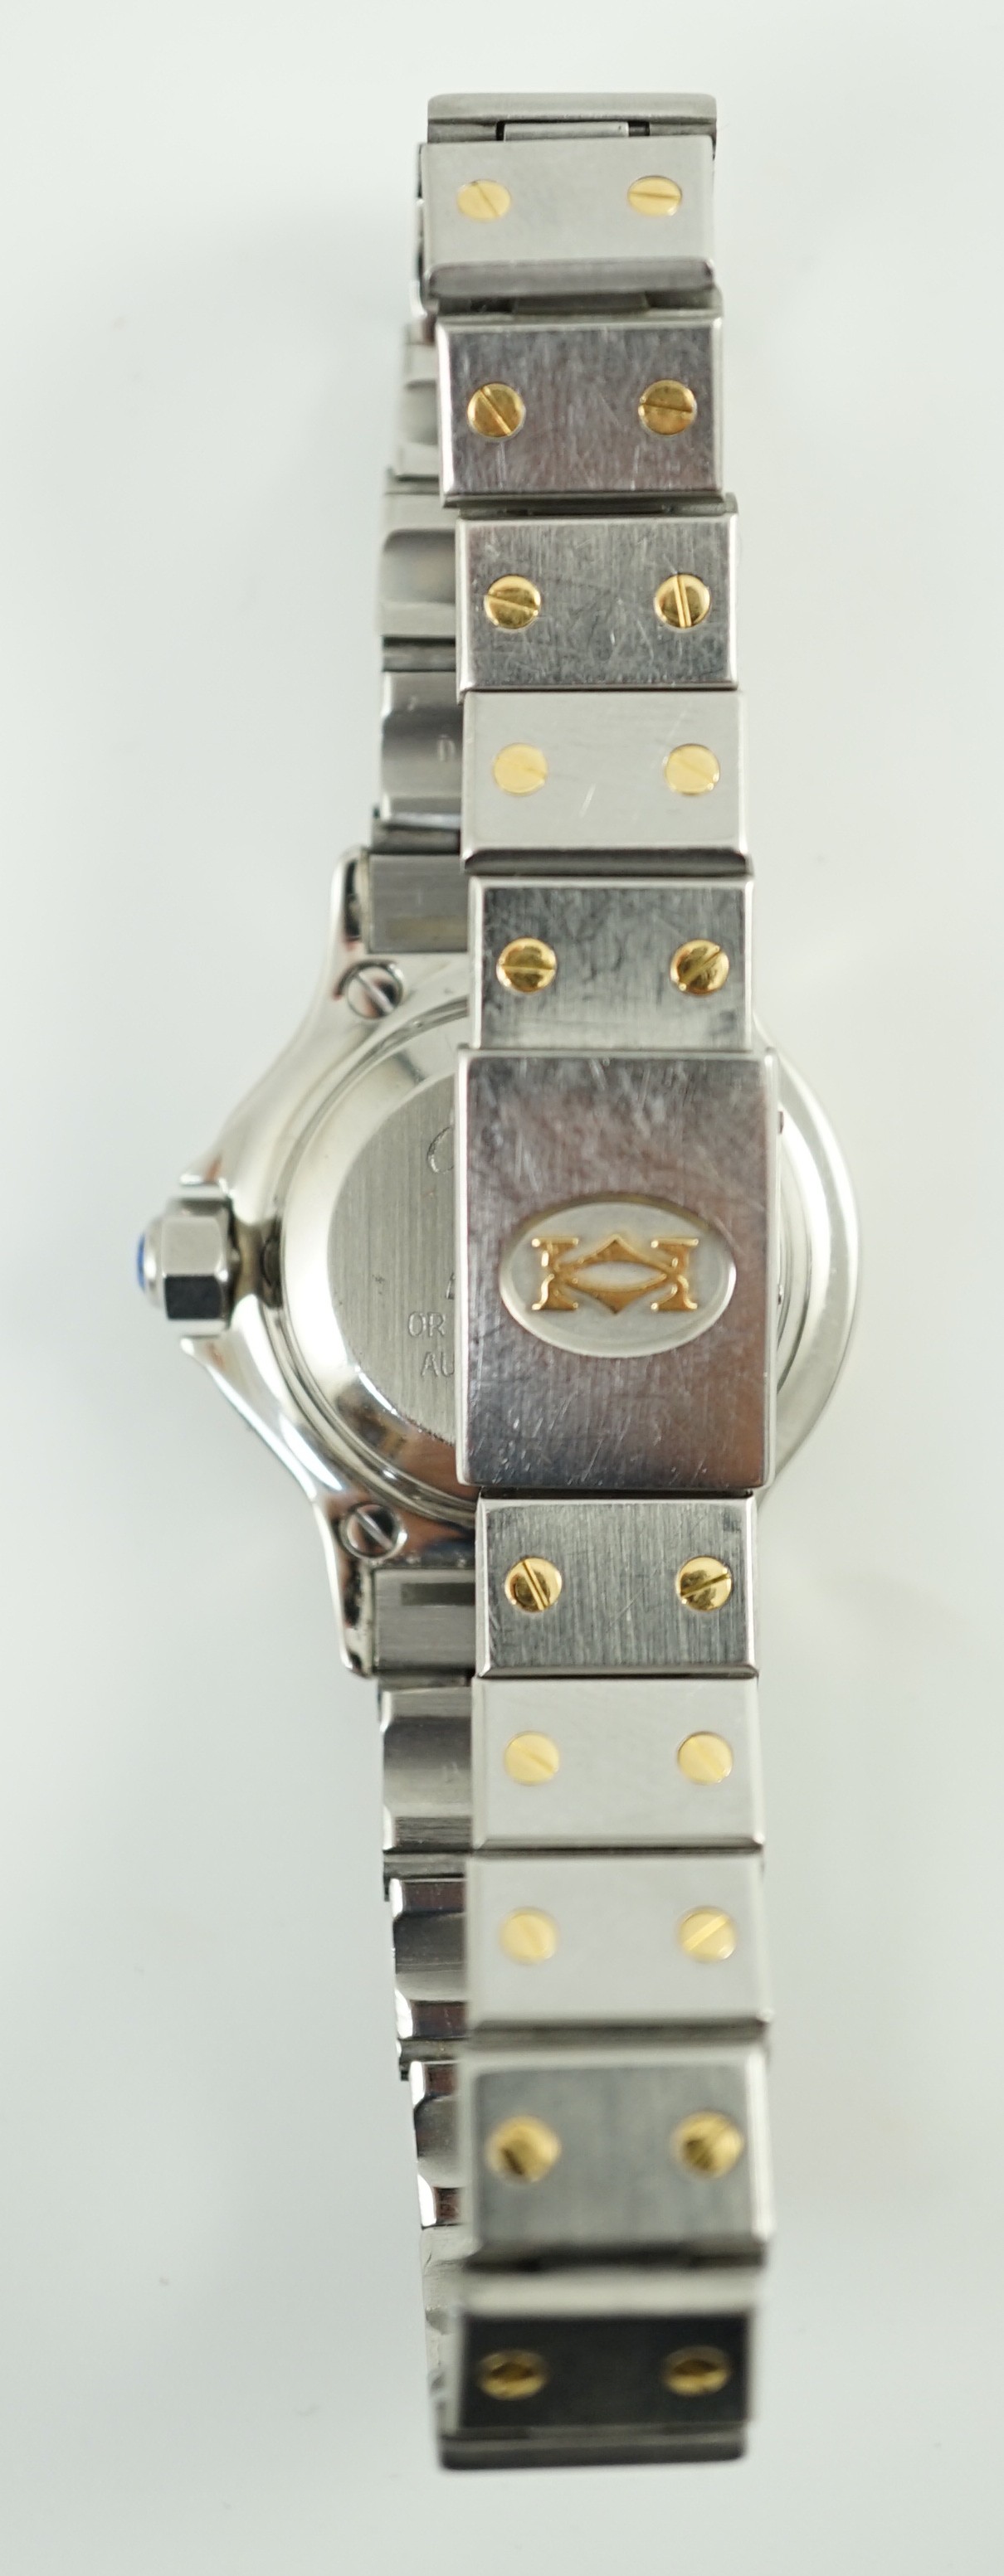 A lady's modern steel and gold Cartier Santos Ronde manual wind wrist watch, on Cartier bracelet with deployment clasp